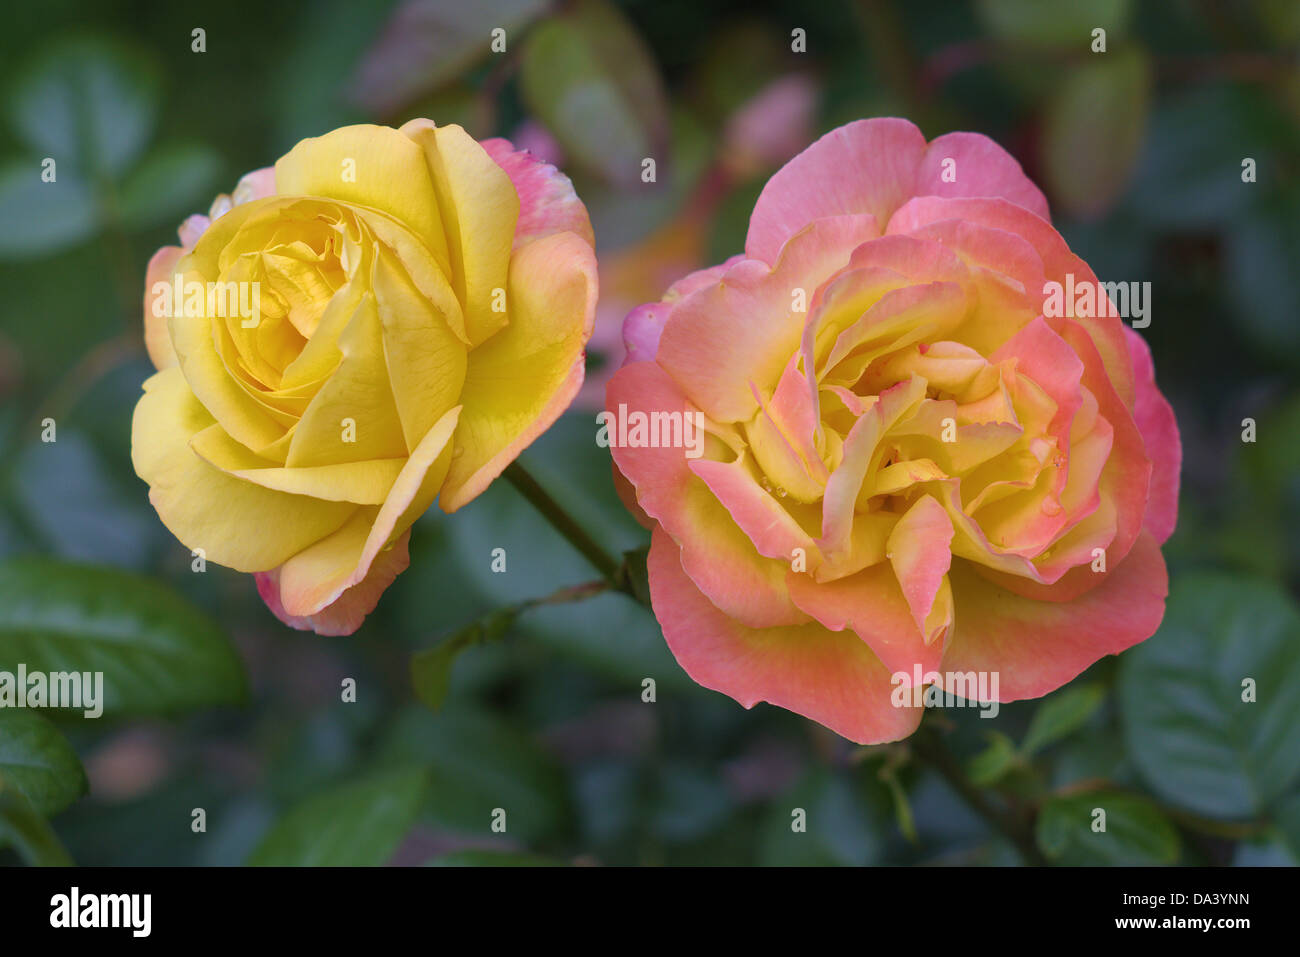 Two pink and yellow roses delicate charming fragrant Stock Photo